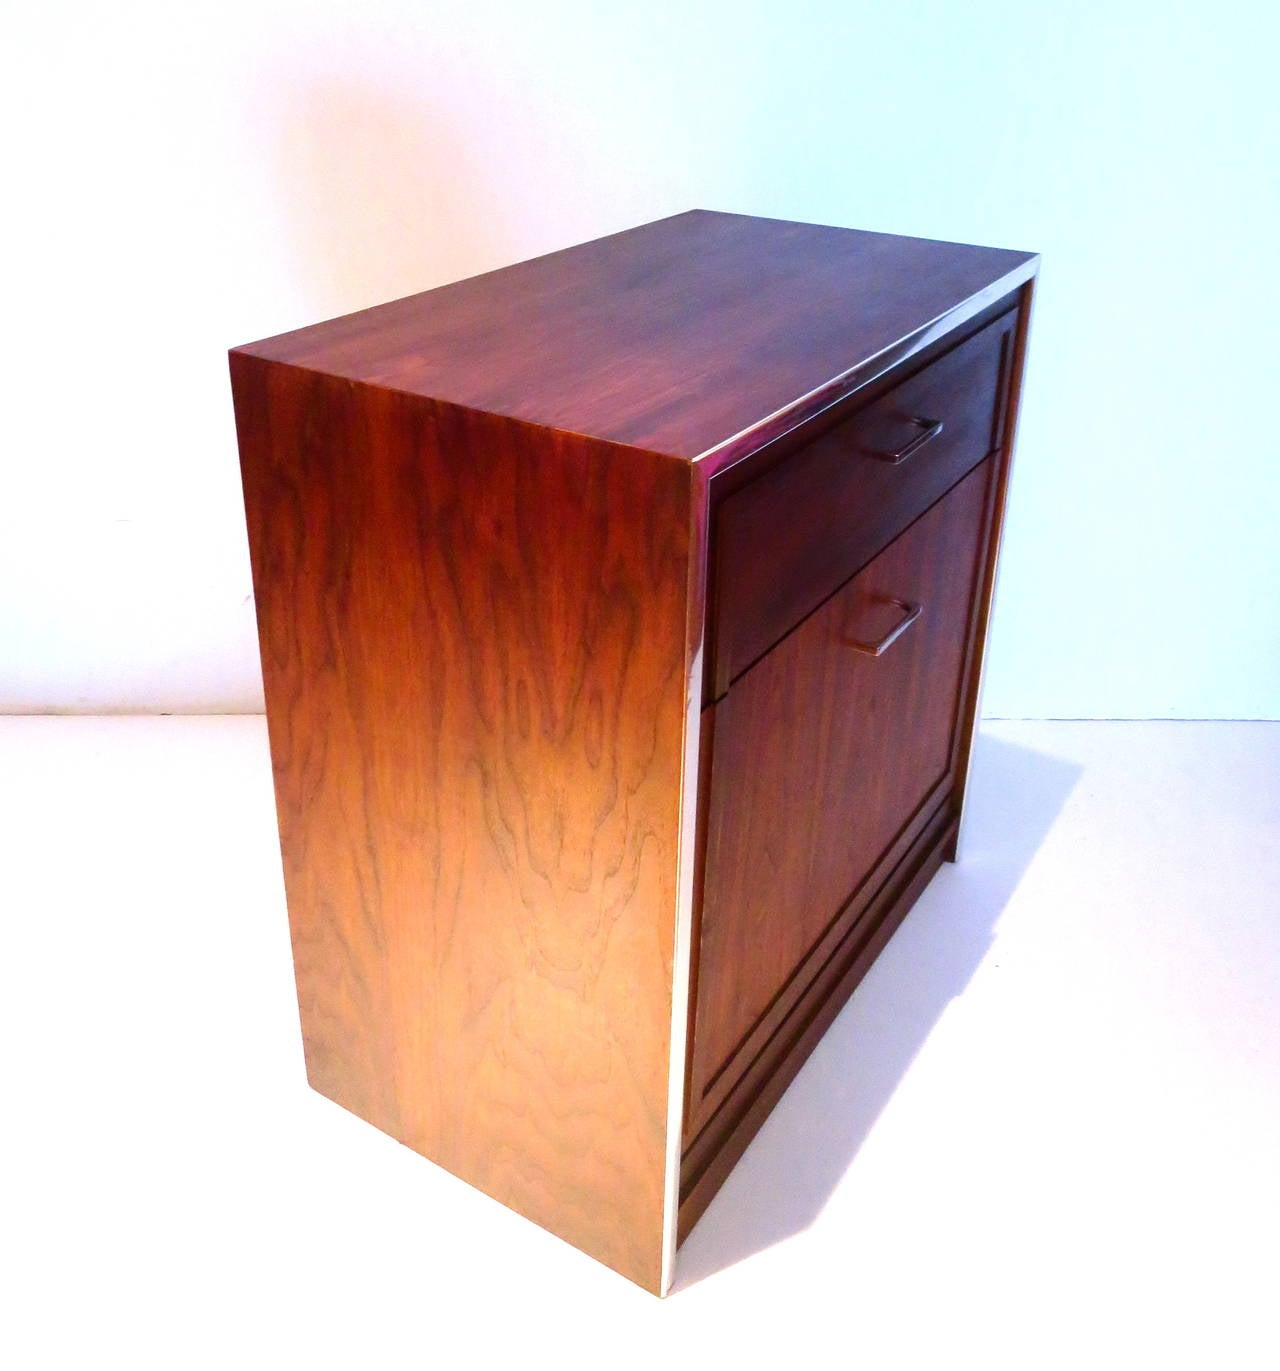 Very simple design on this 1970s walnut cabinet with pull on door and drawer, designed for 12